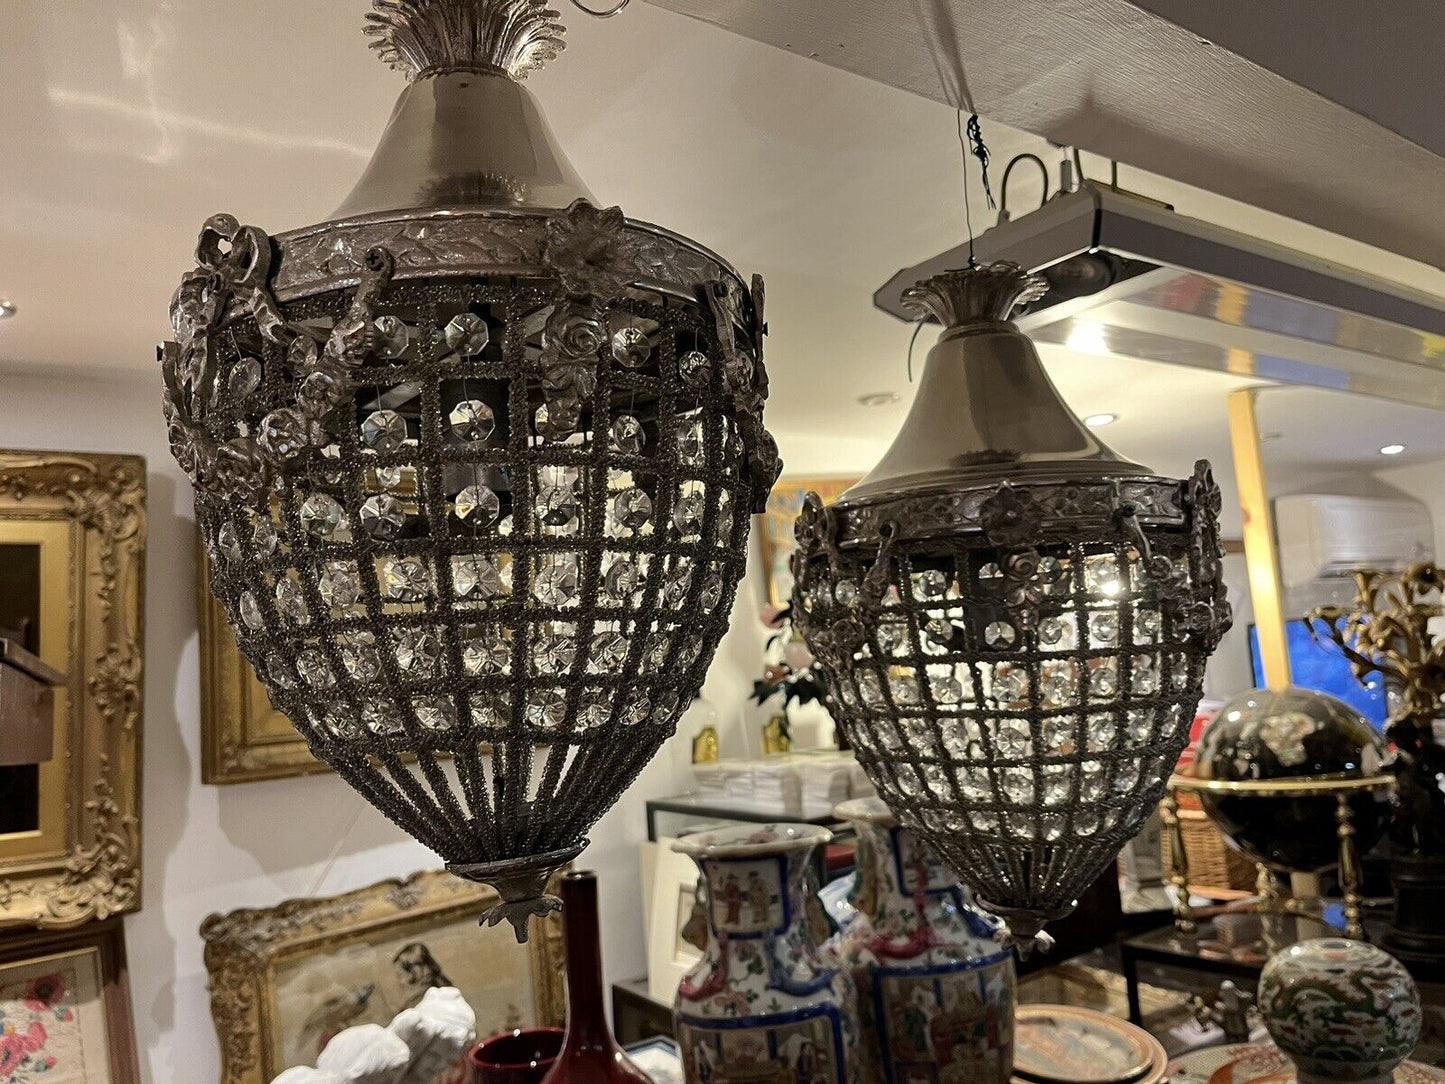 Pair of Chrome Ceiling Chandelier lights.